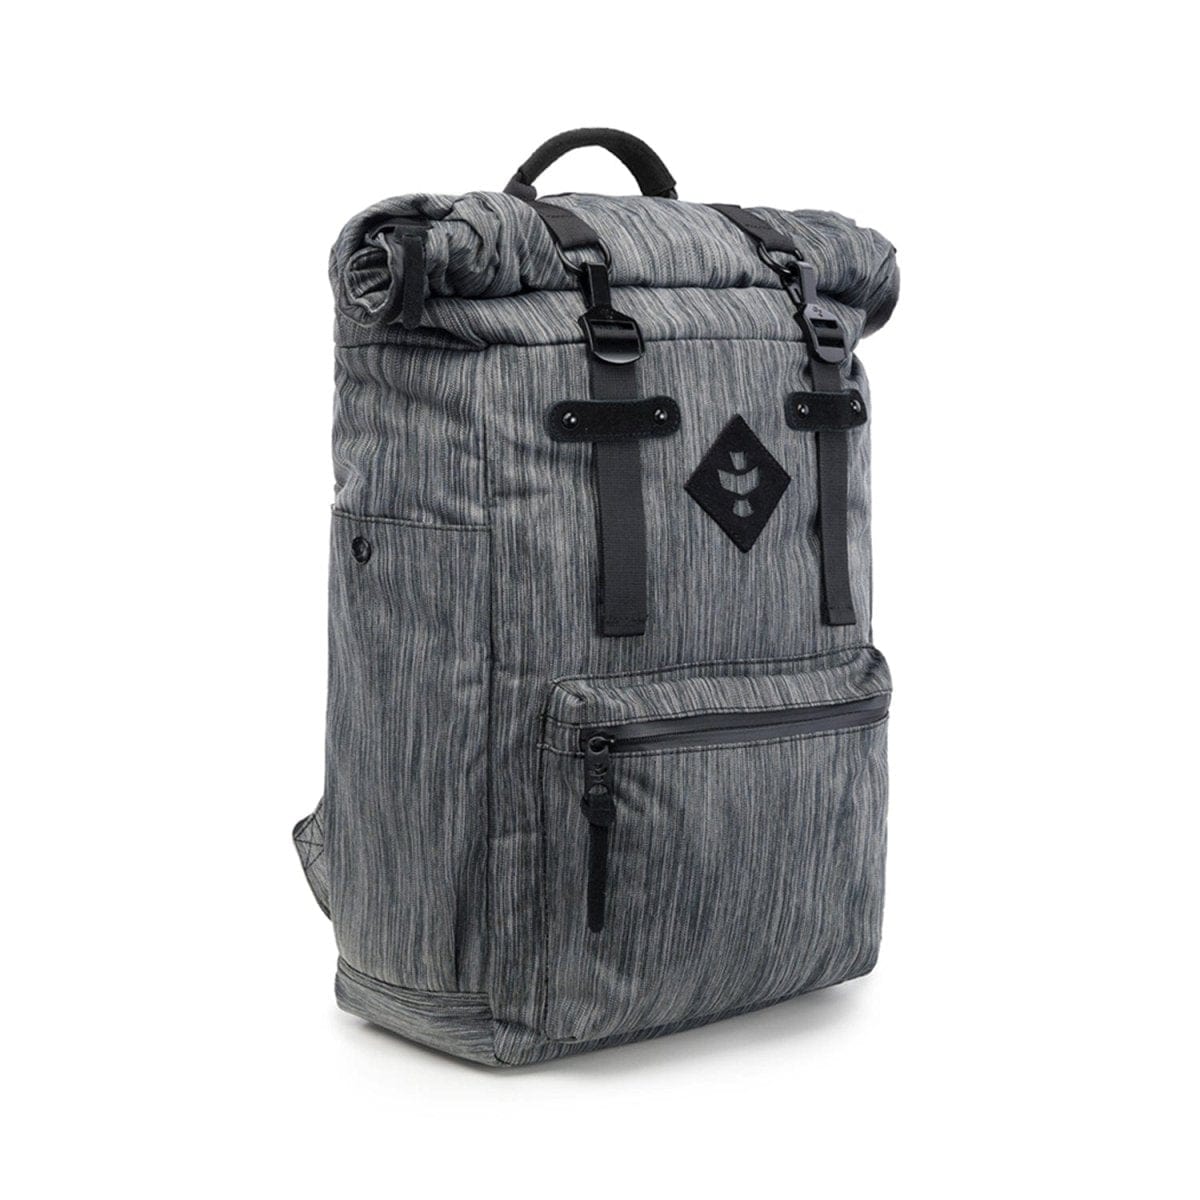 Revelry Supply Travel Bag Striped Dark Grey The Drifter - Smell Proof Rolltop Backpack